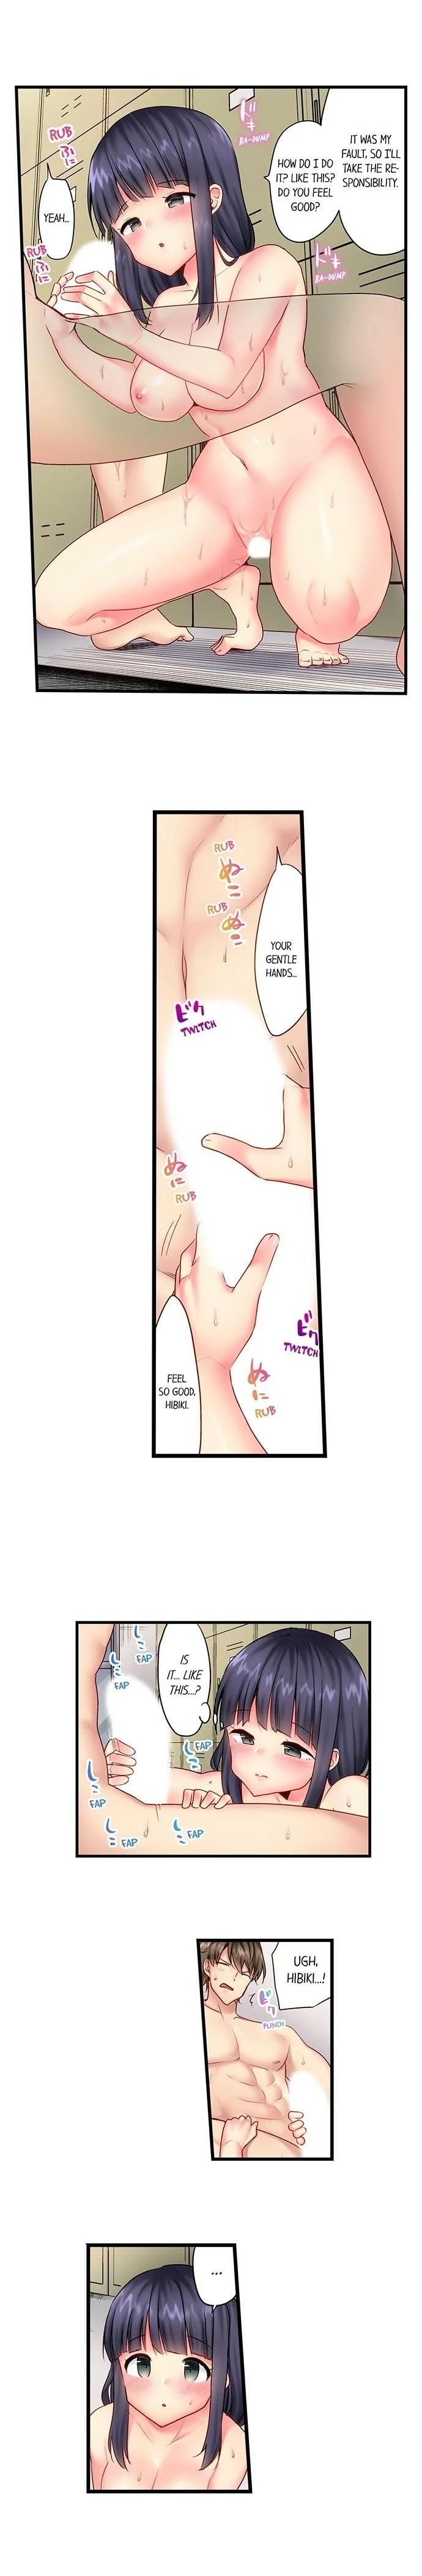 [Yuuki HB] "Hypnotized" Sex with My Brother Ch.21/? [English] [Ongoing] 101